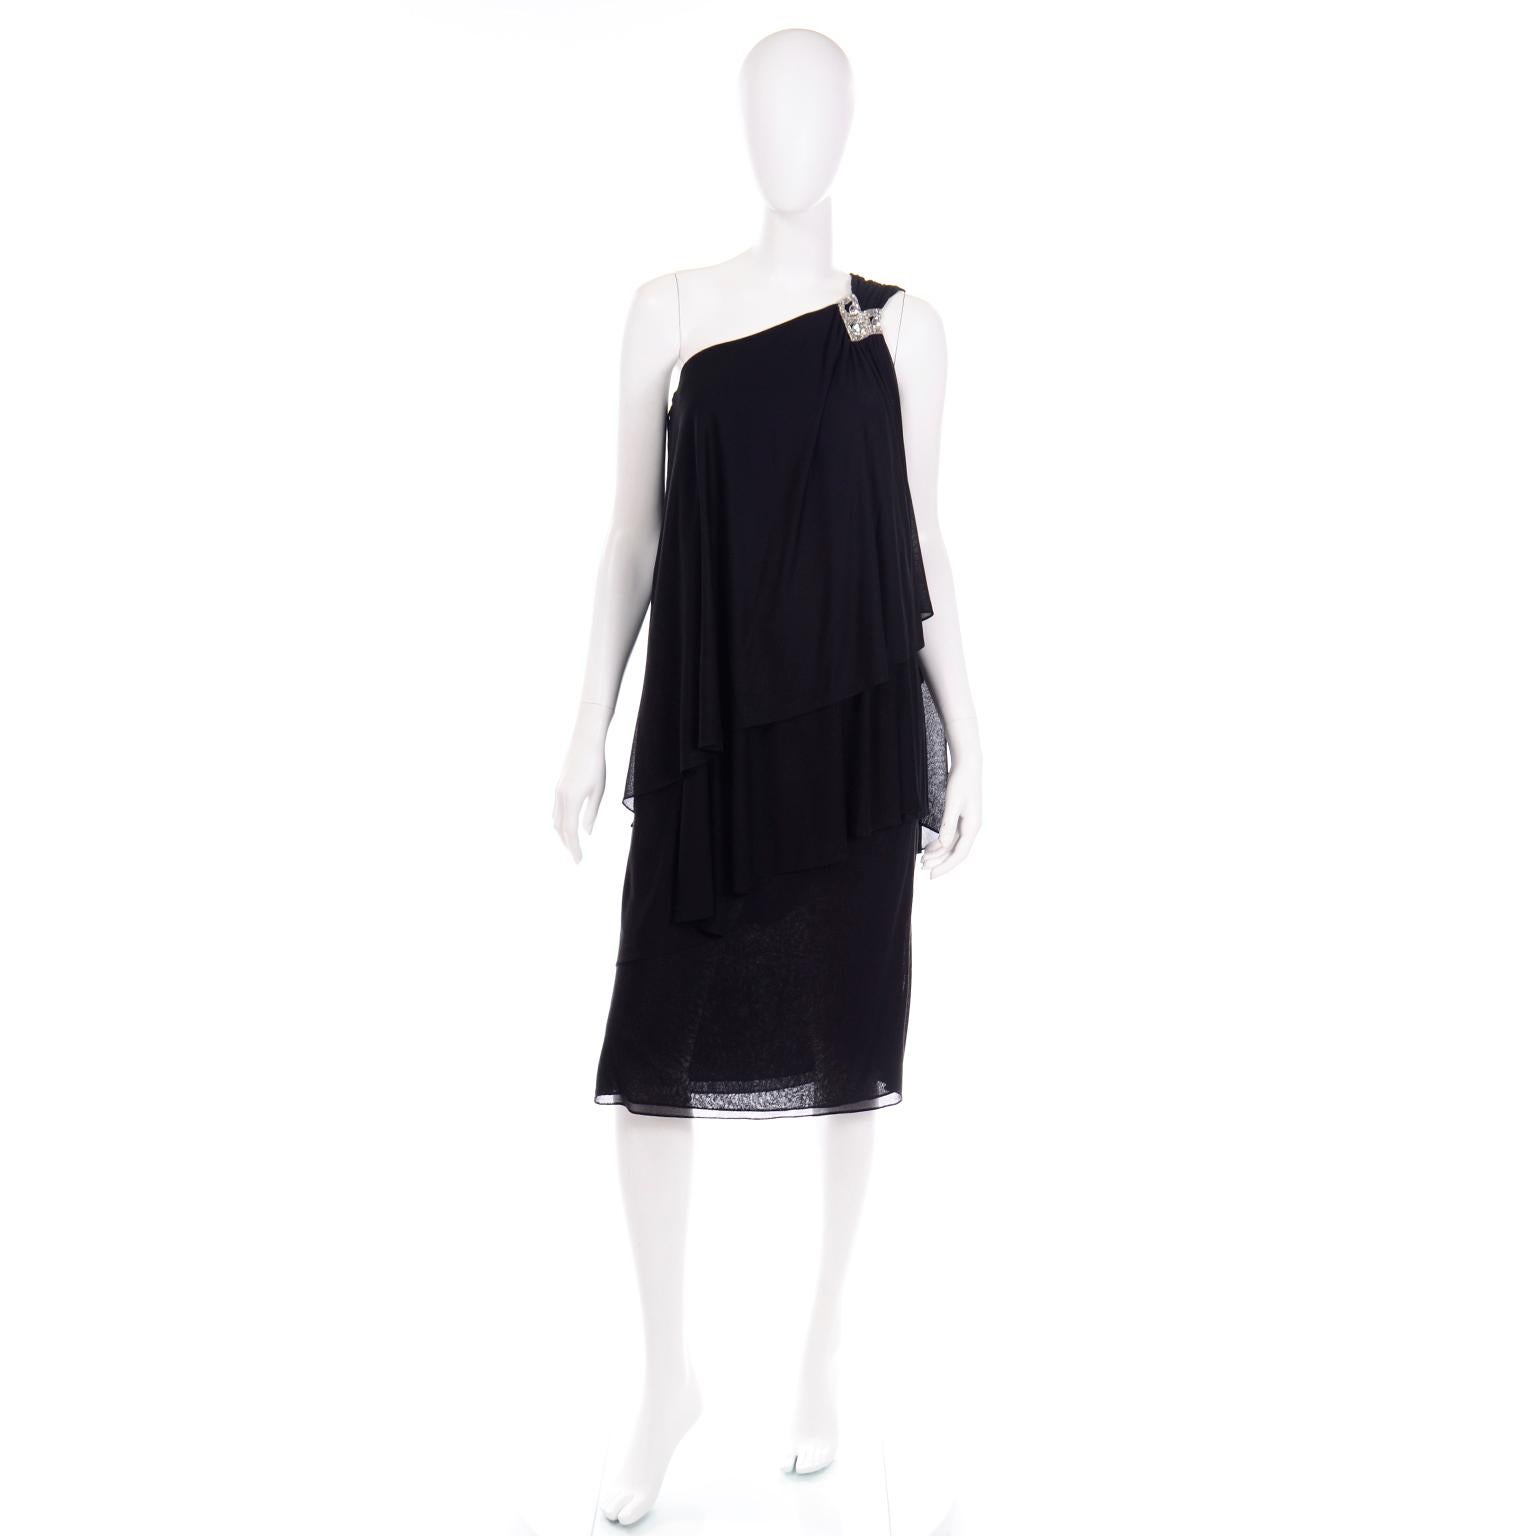 This is a Grecian style vintage 1970's Lilli Diamond black evening dress with one shoulder rhinestone detail. This pretty dress has several layers of the same semi sheer black silky lightweight jersey fabric with varying lengths in the layers. There